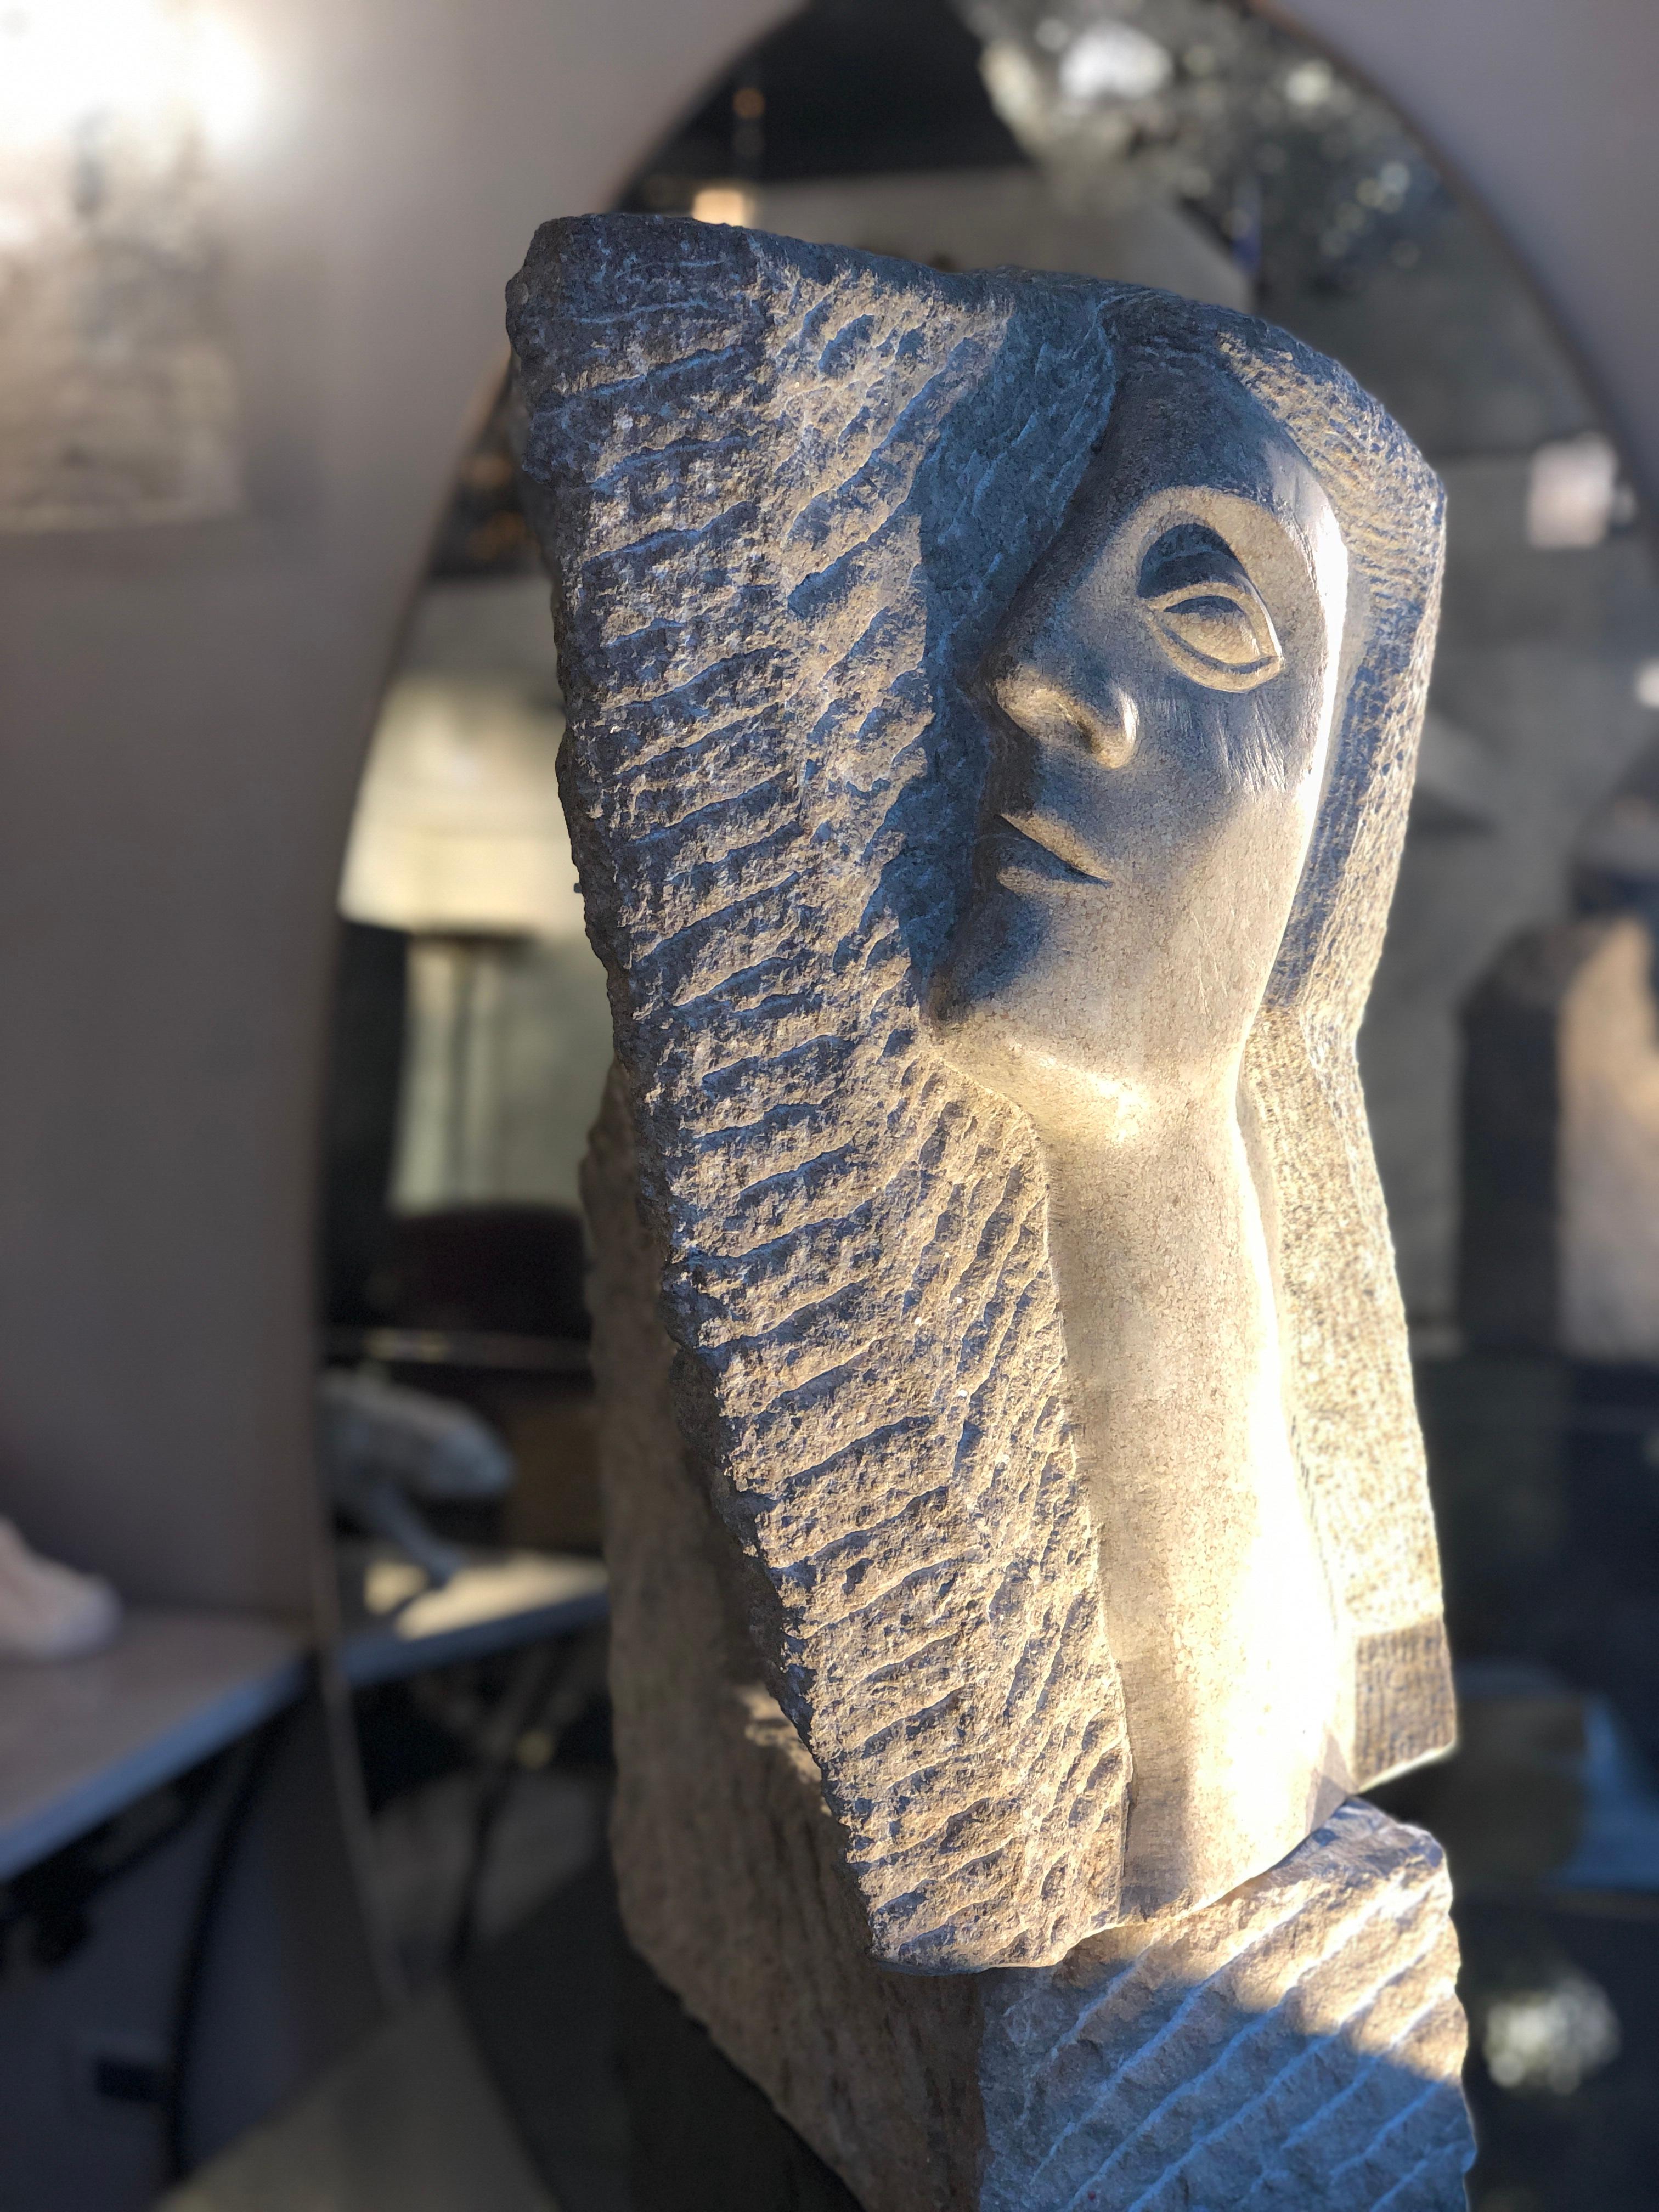 Art Deco sculpture, signed Ruhlmann, pink granite. Provenance: family object, Lyon region
The sculpture, showing a lady profile, is composed of two pieces : the base and the face. The face is mounted on a hinge which allows the piece to be turned